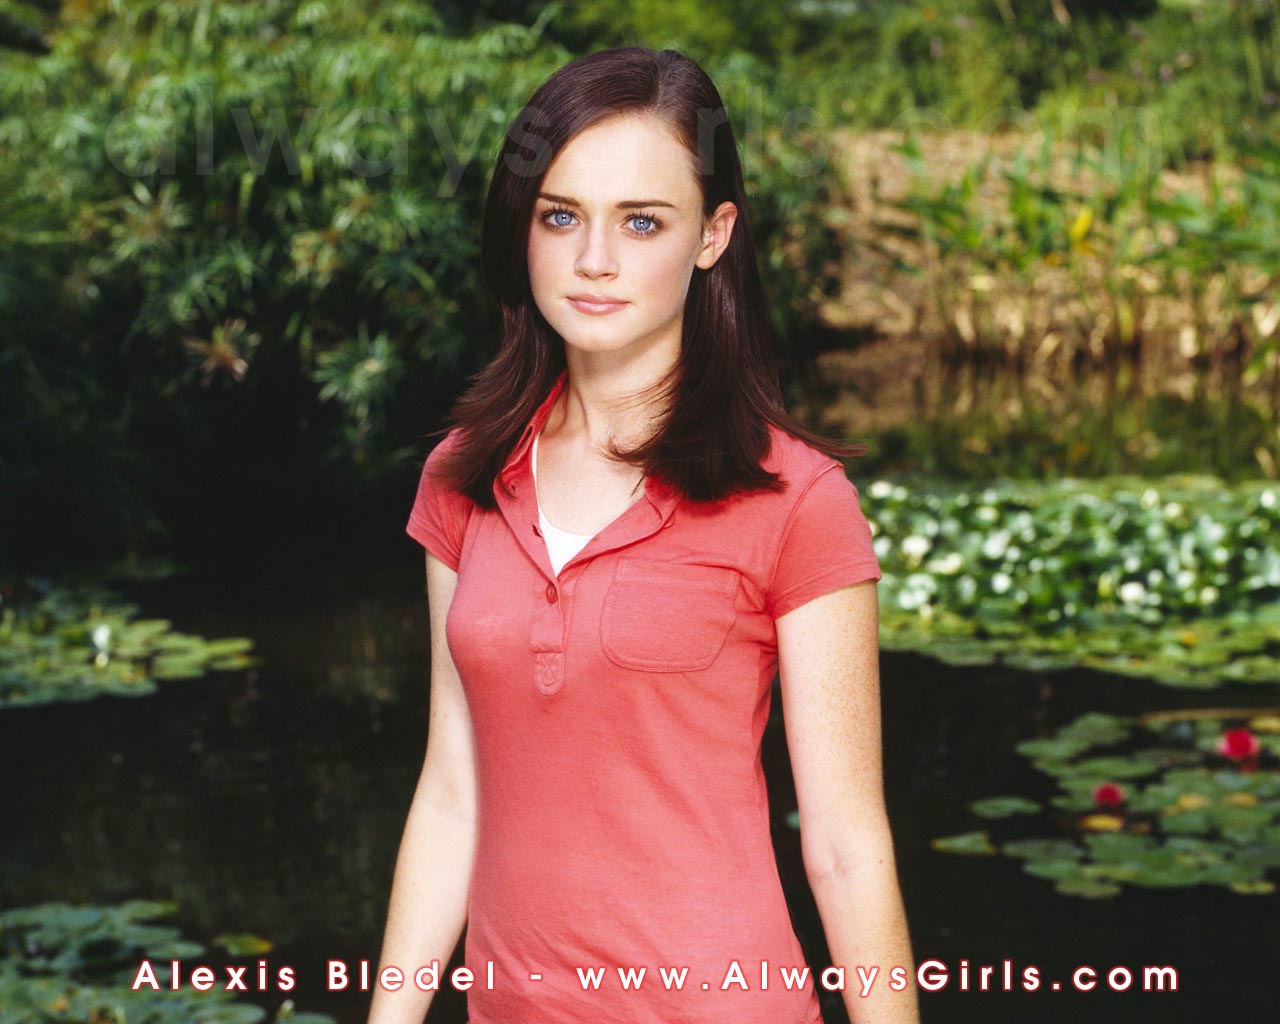 High quality Alexis Bledel wallpapers Wallpapers - HD Wallpapers 11335